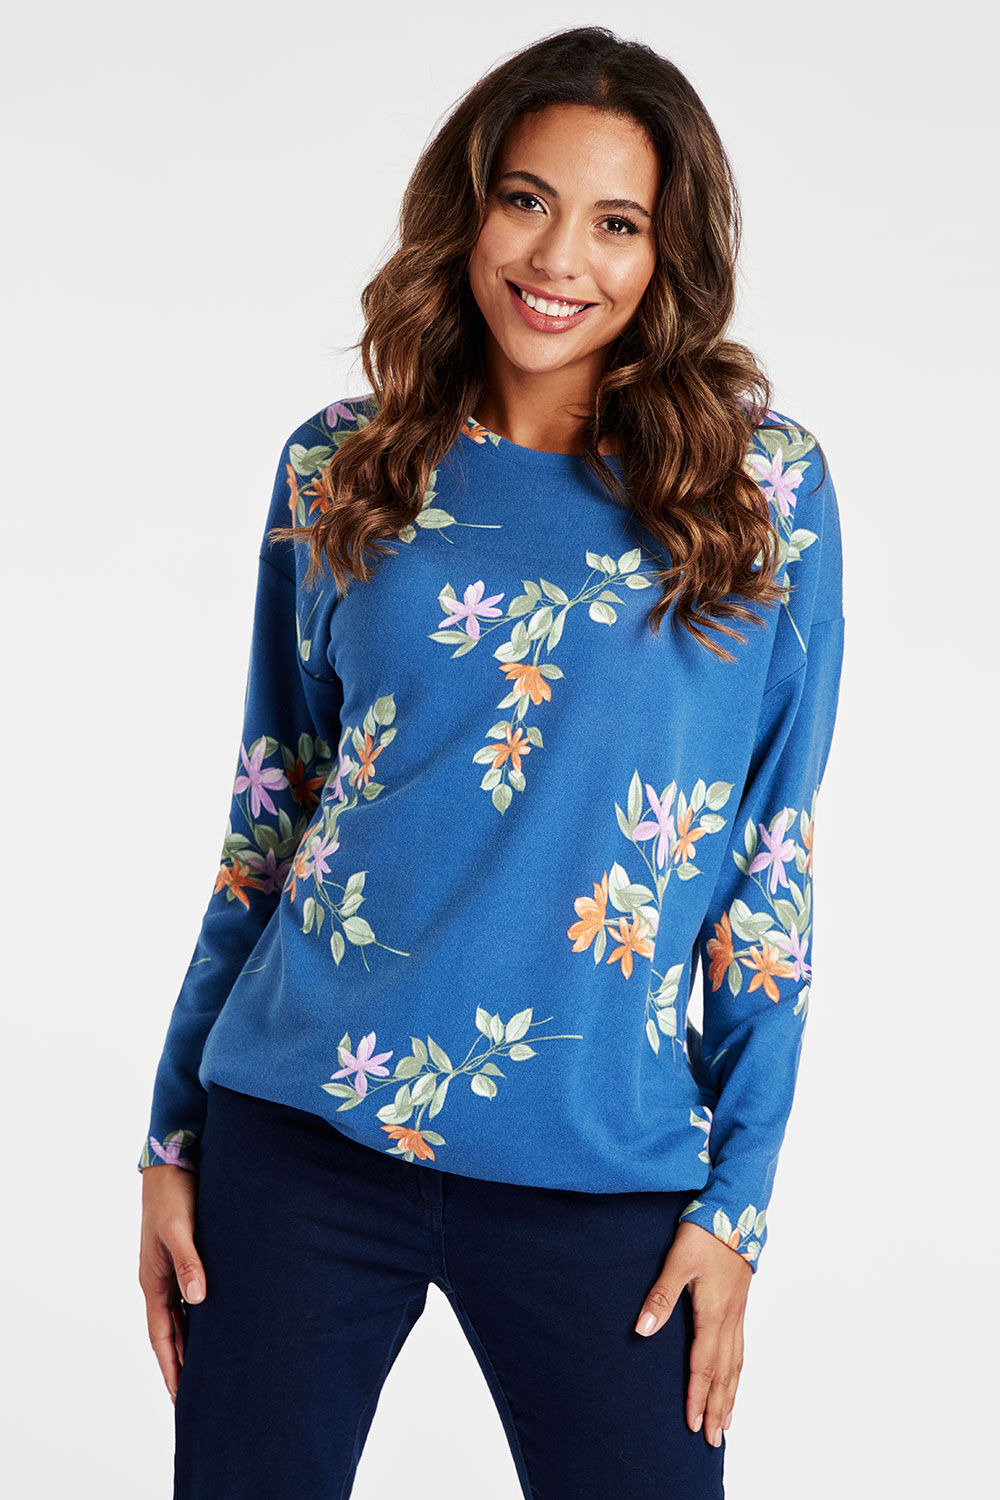 Bonmarche Navy Long Sleeve All Over Floral Print Soft Touch Top, Size: 18